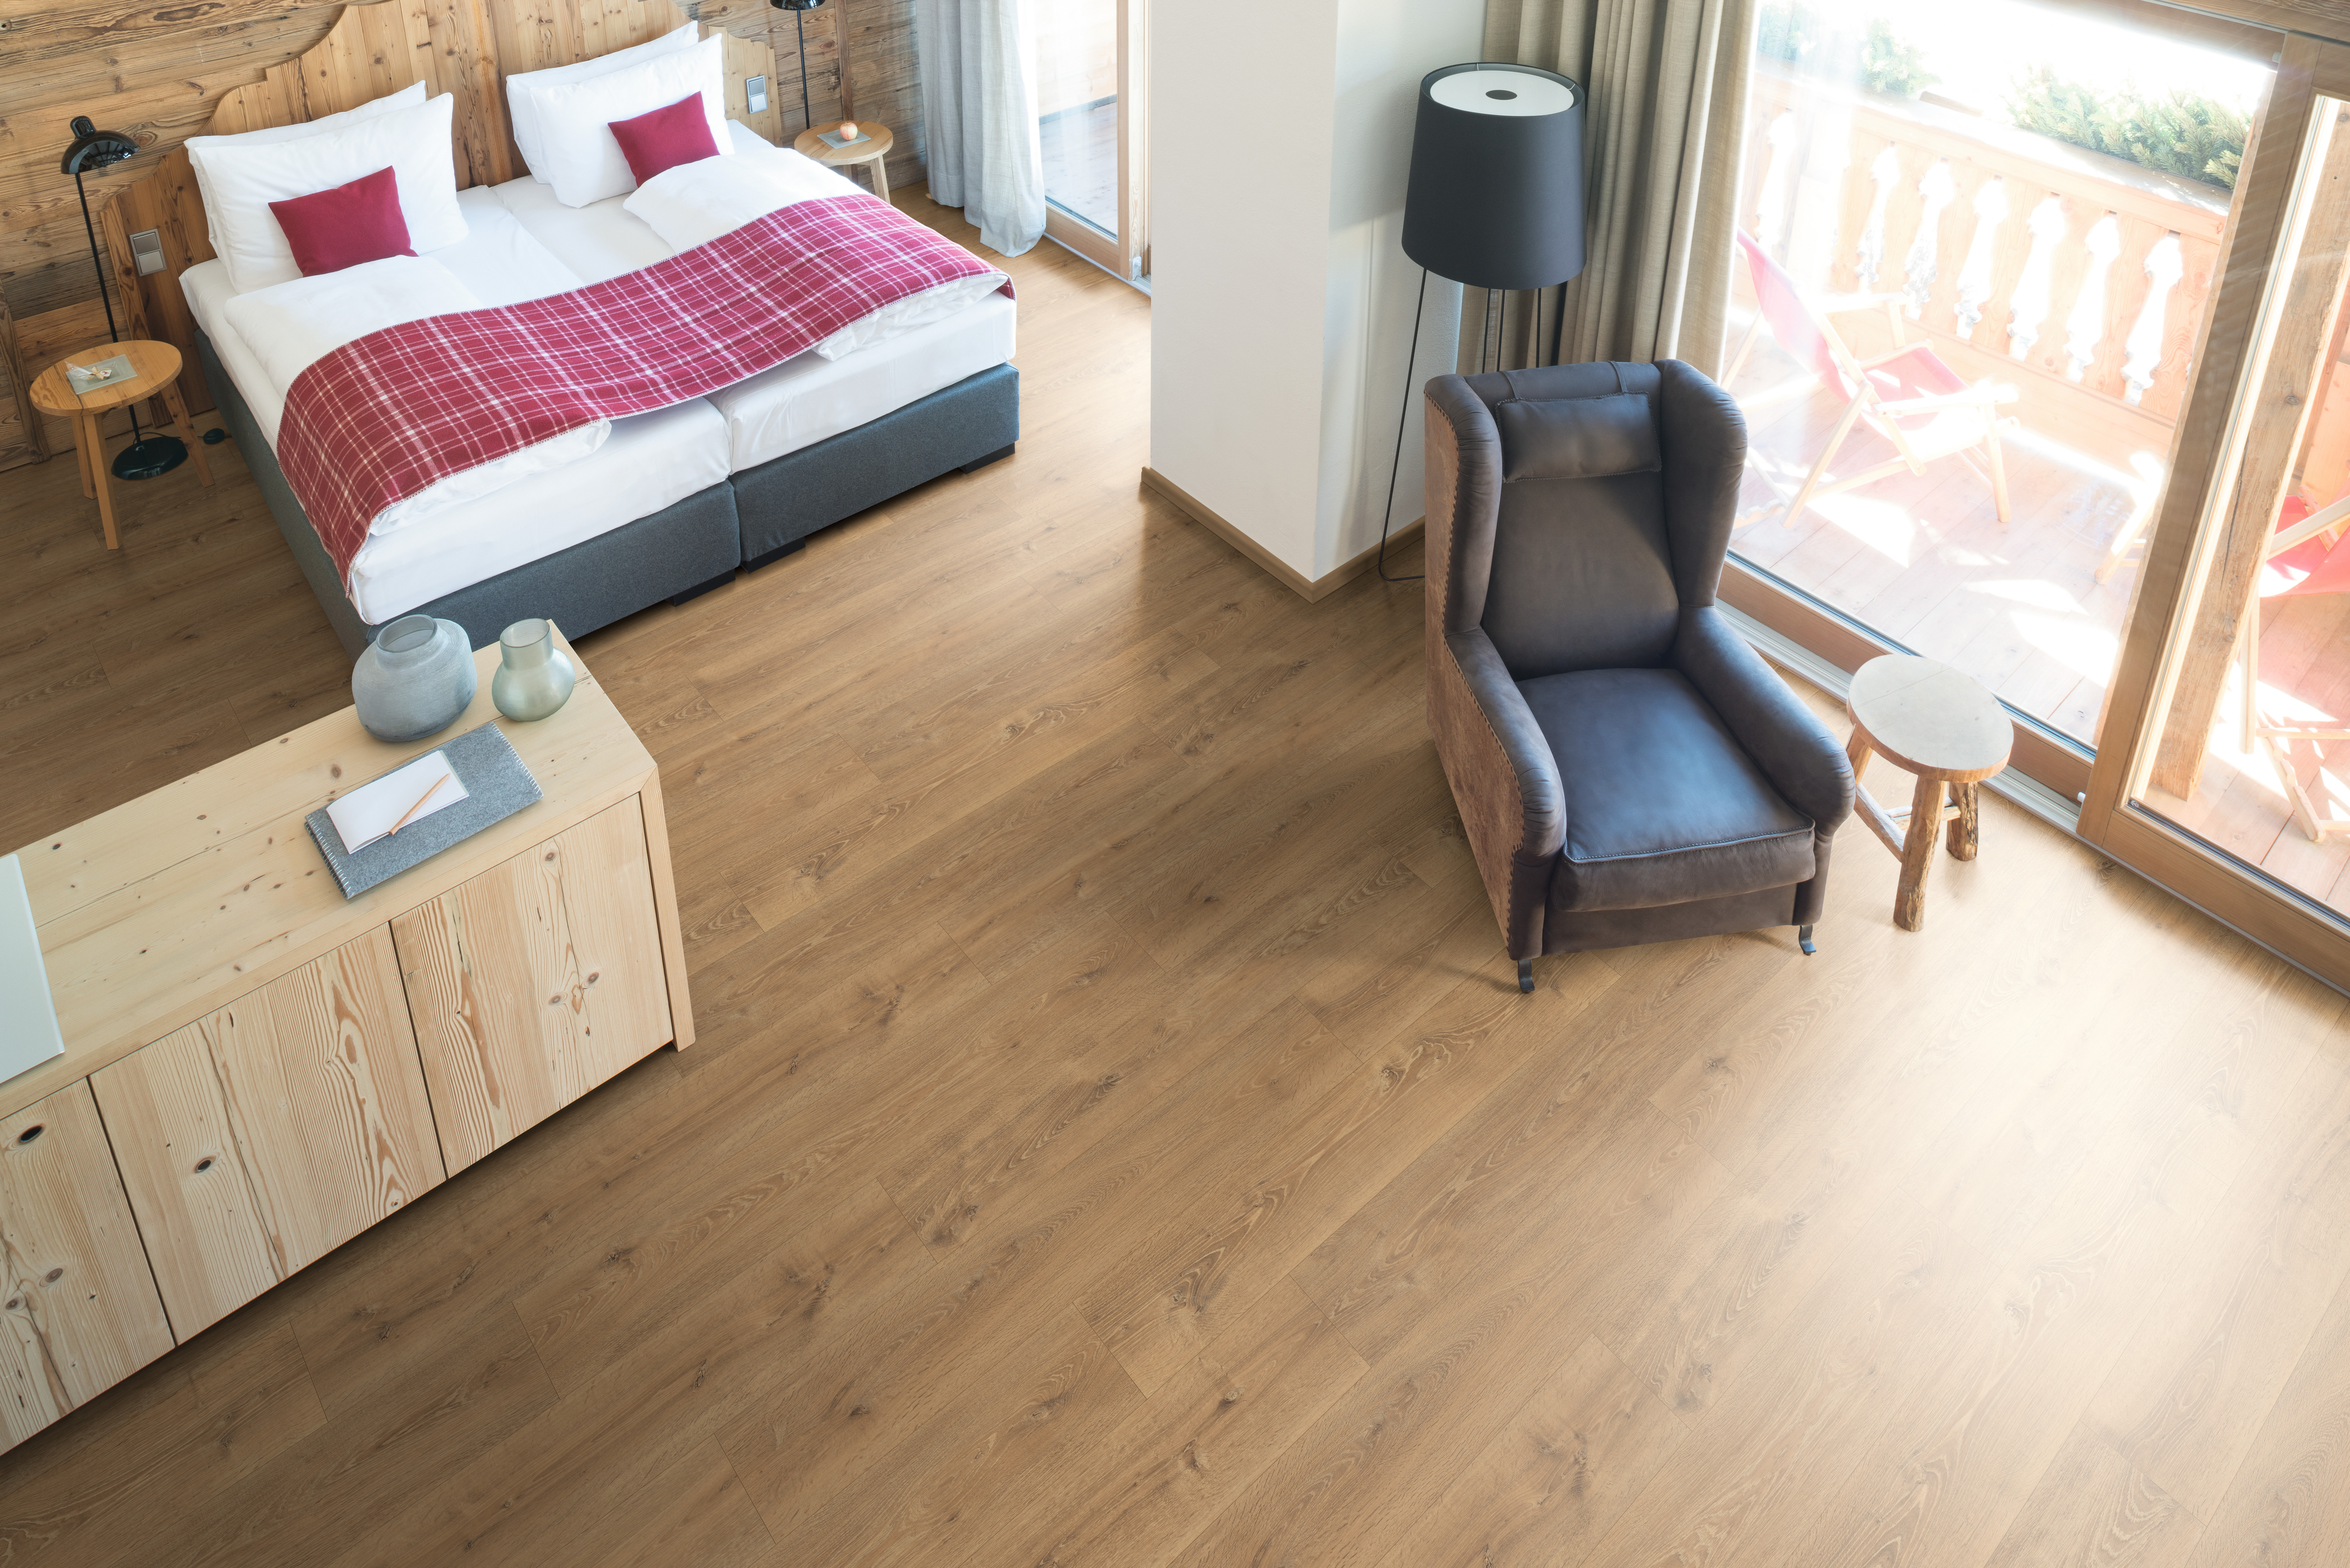 Large floorboards for quick flooring installation